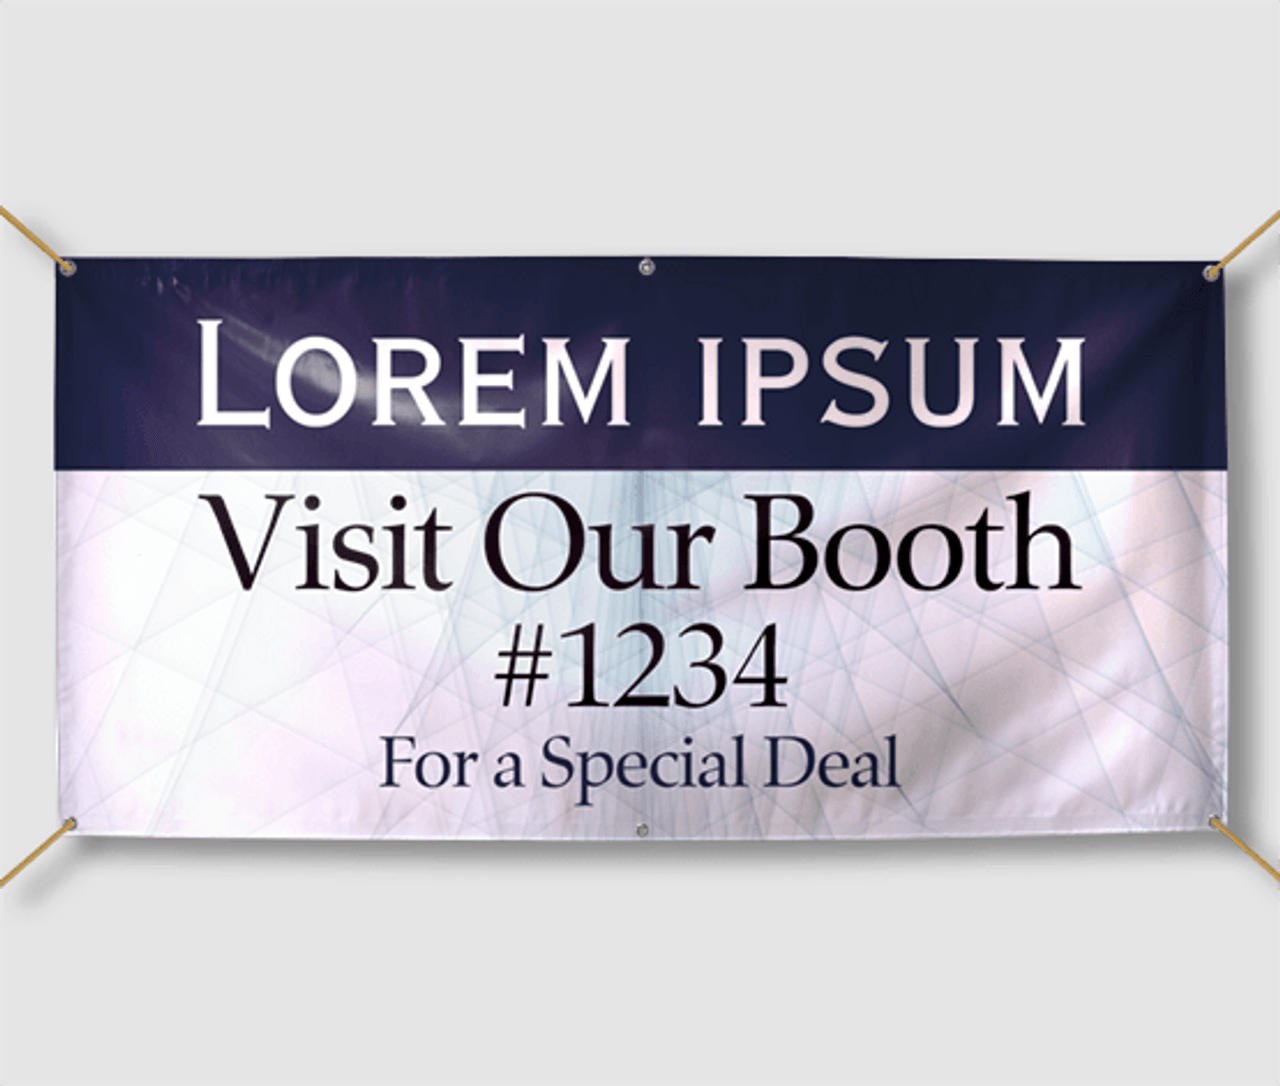 Trade Show Banners Half Price Banners